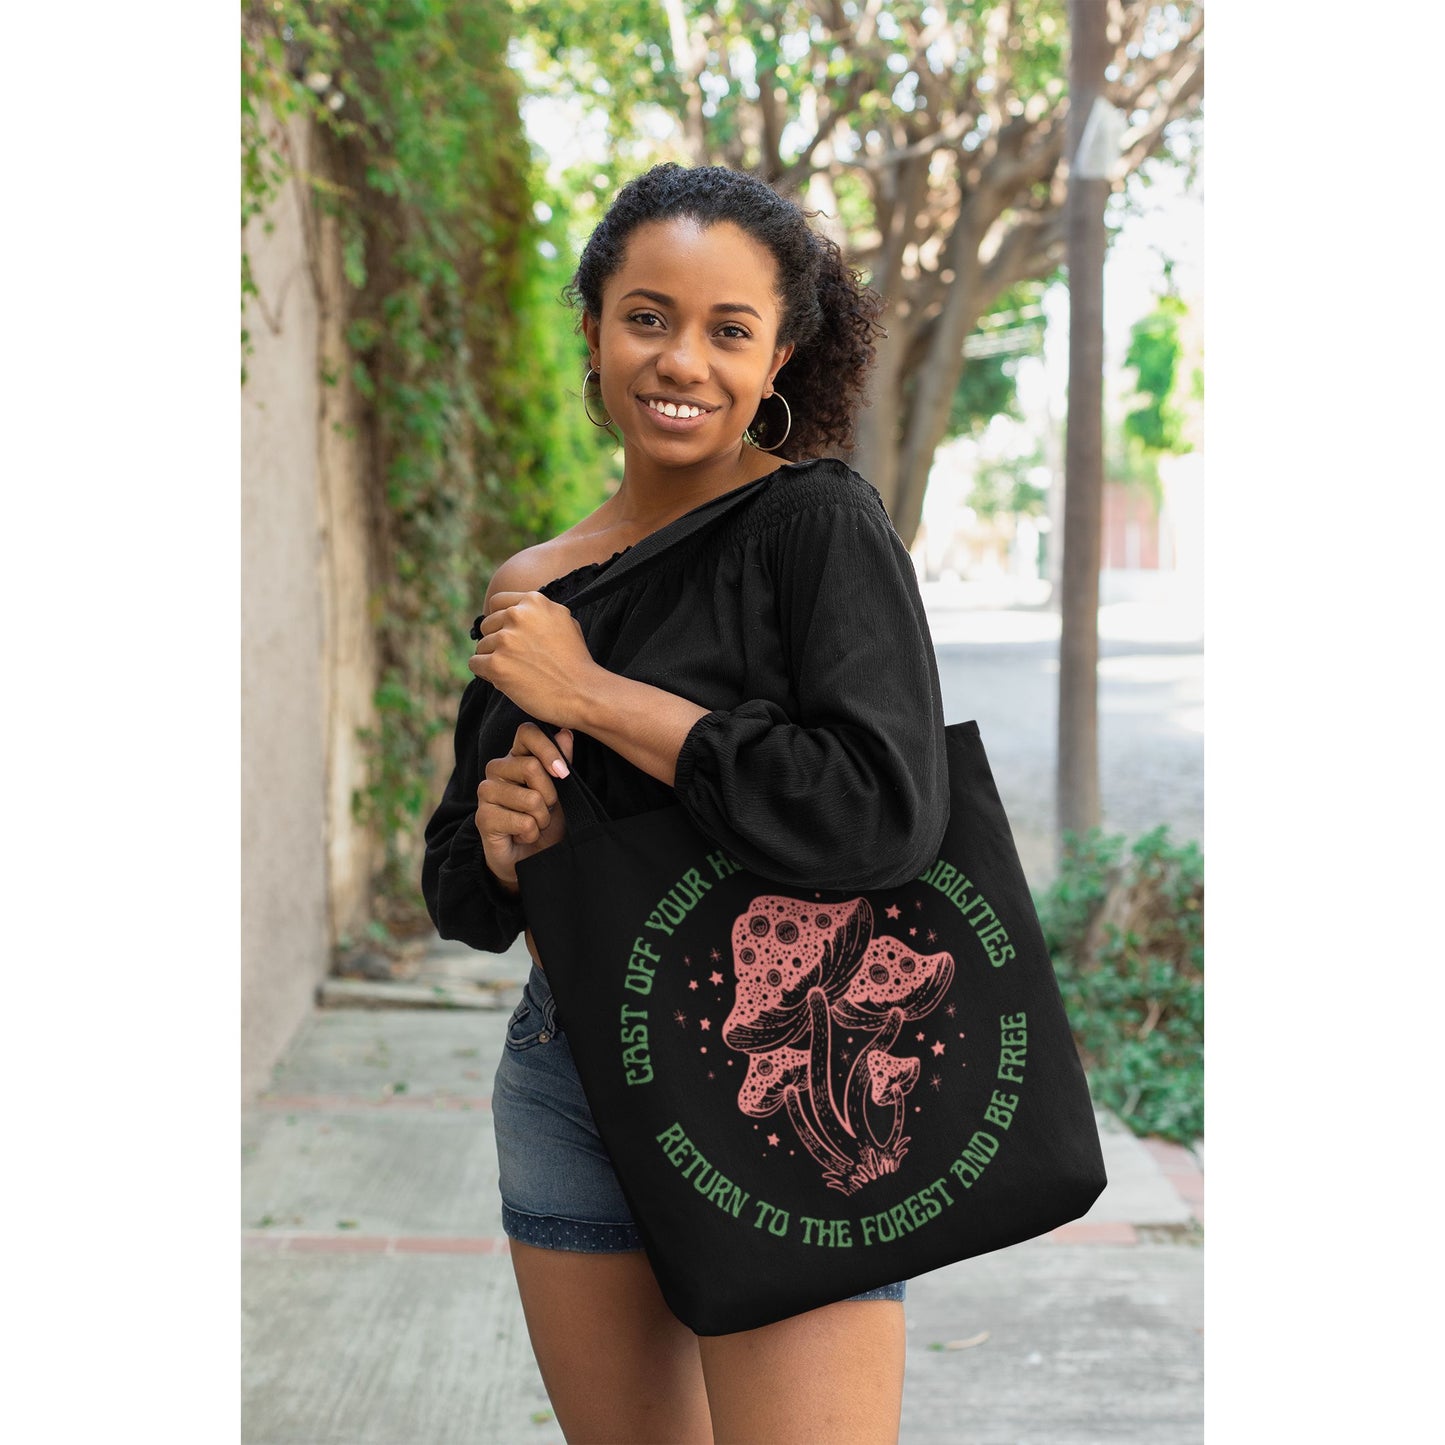 Cast Off Your Human Responsibilities Tote Bag in Black | 18" x 18"